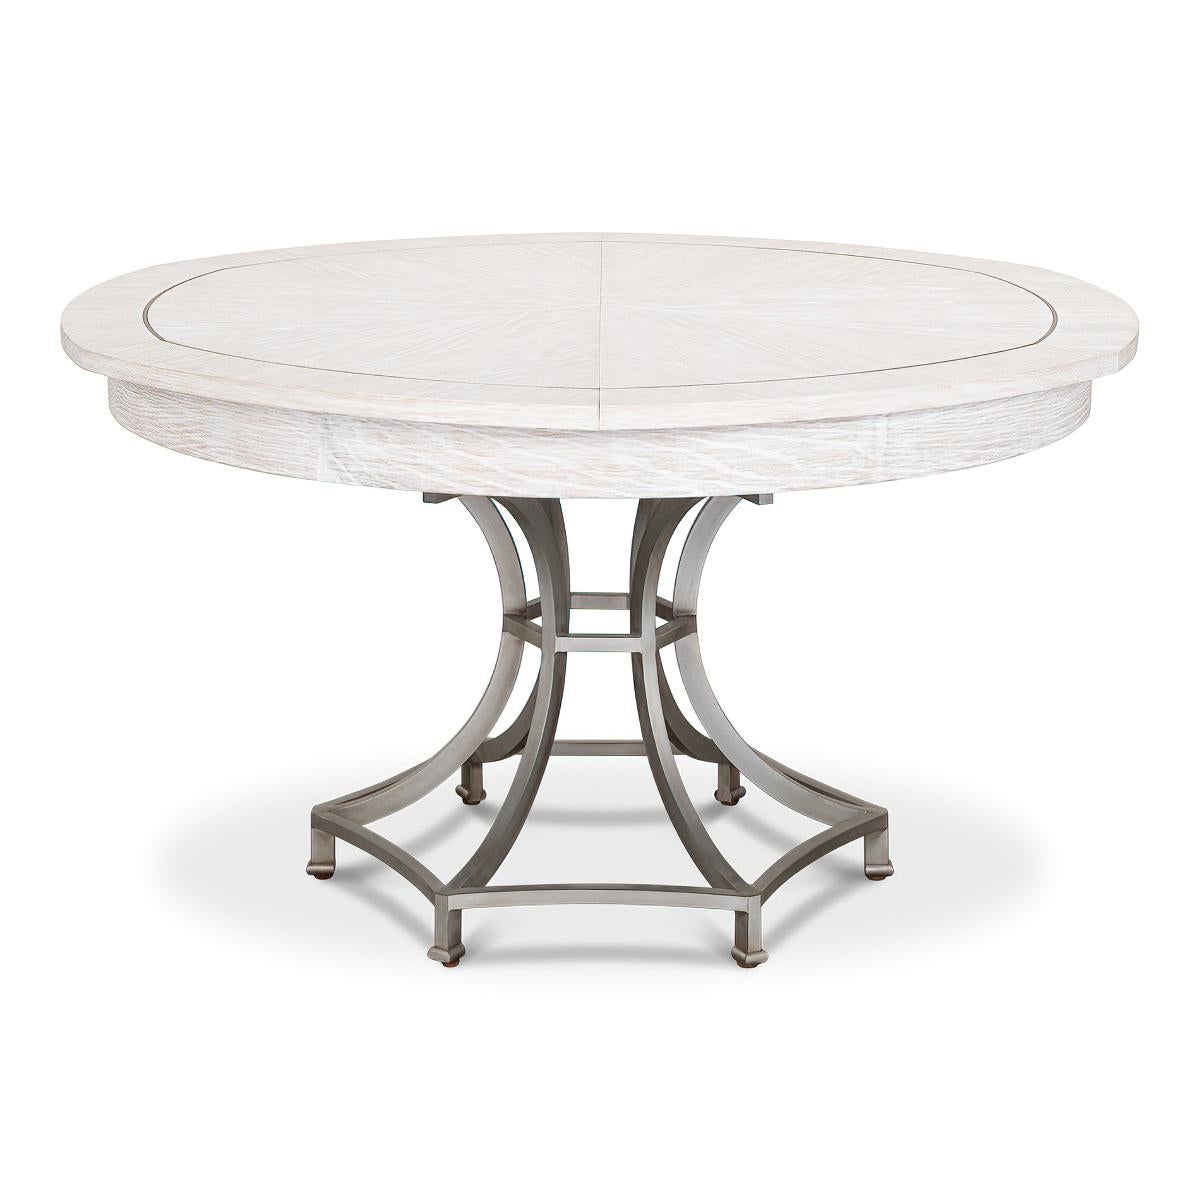 Modern Industrial Round Dining Table, White Wash 4